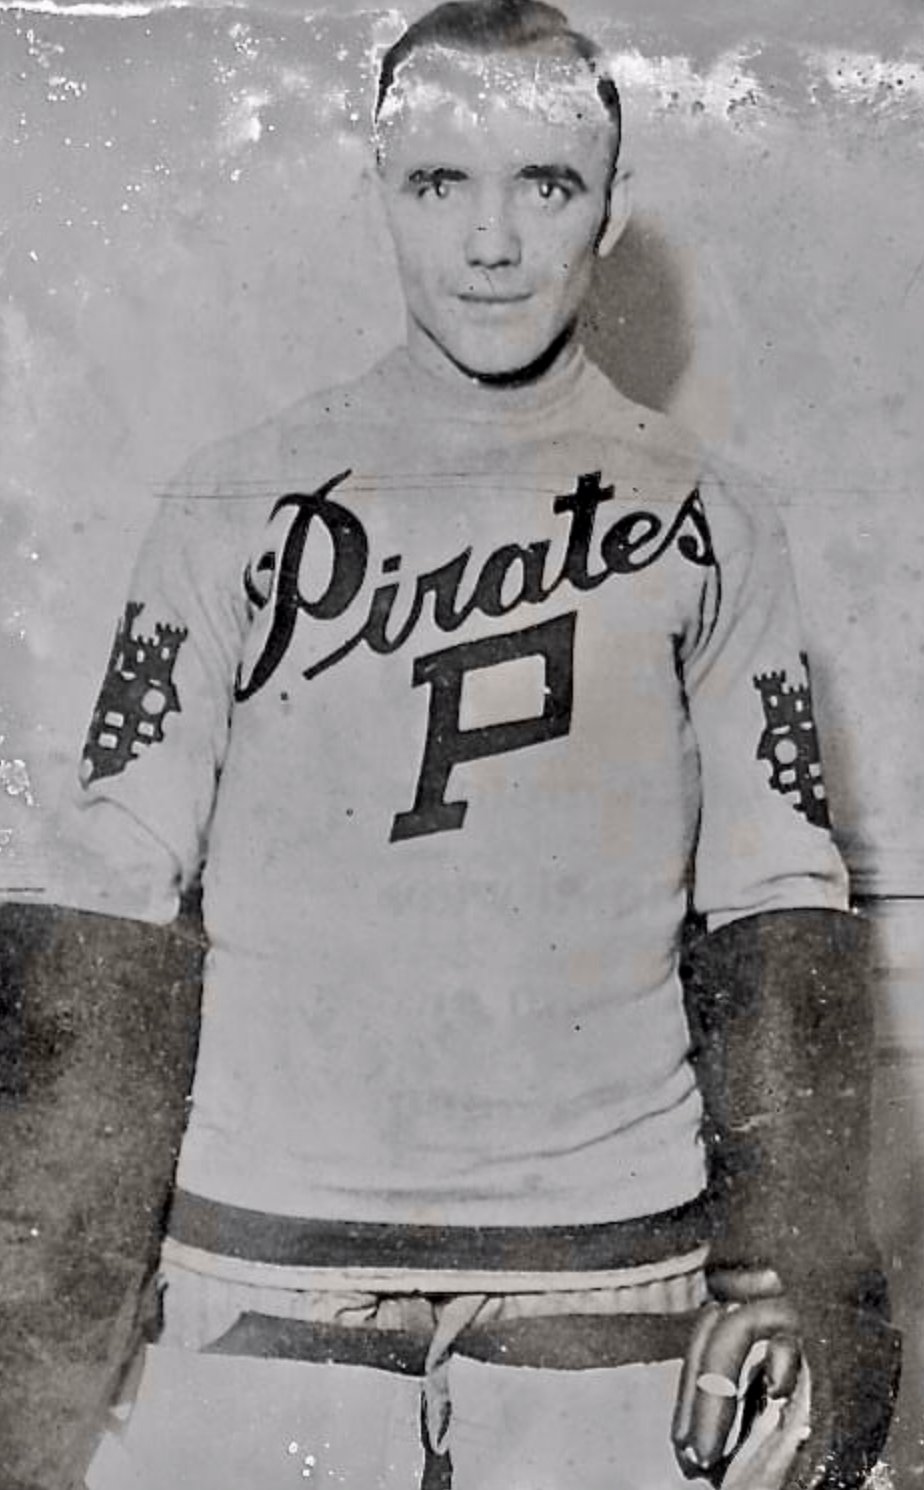 PittsburghHockey.net on Twitter: On this day in #Pittsburgh hockey history:  1900 - Pittsburgh Pirates' Roy Shrimp Worters was born. Worters is the  goalie credited with the first NHL win in Pittsburgh history. (